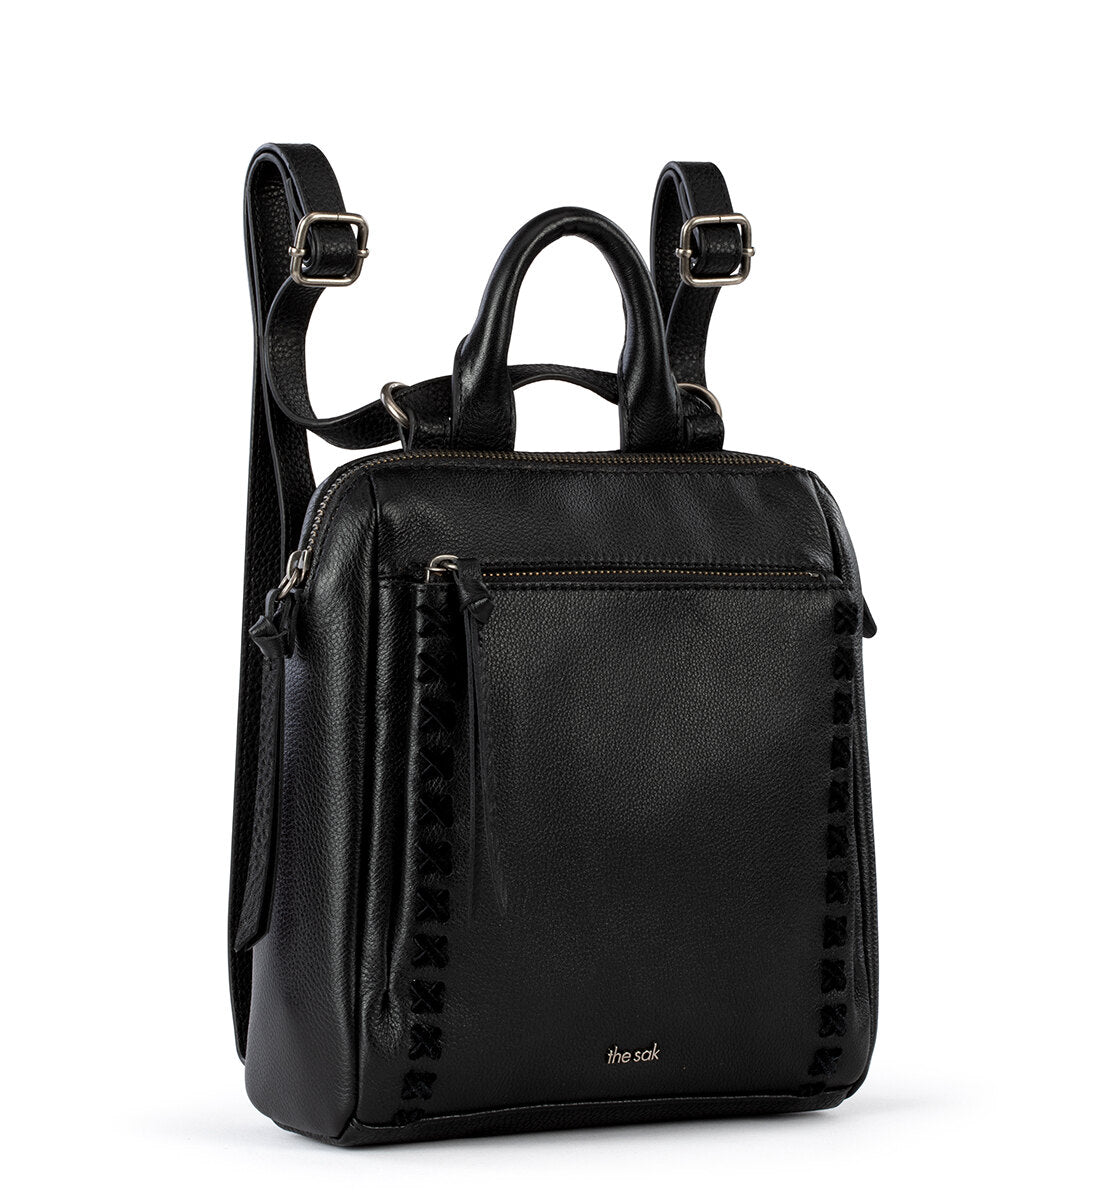 Amazon.com | The Sak Women's Huntley Leather Backpack, Black, One Size |  Casual Daypacks